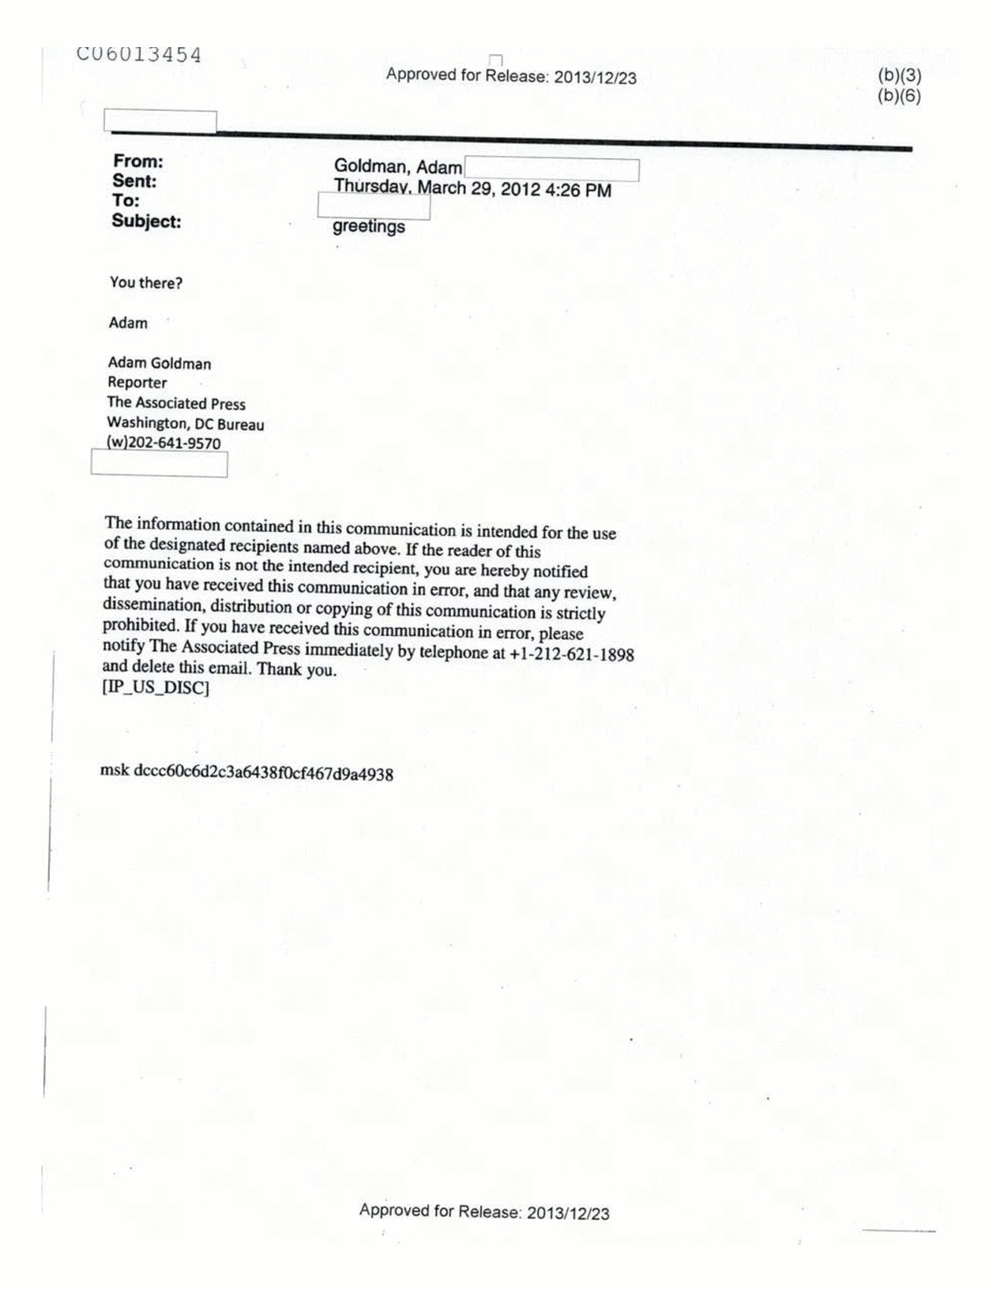 Page 321 from Email Correspondence Between Reporters and CIA Flacks